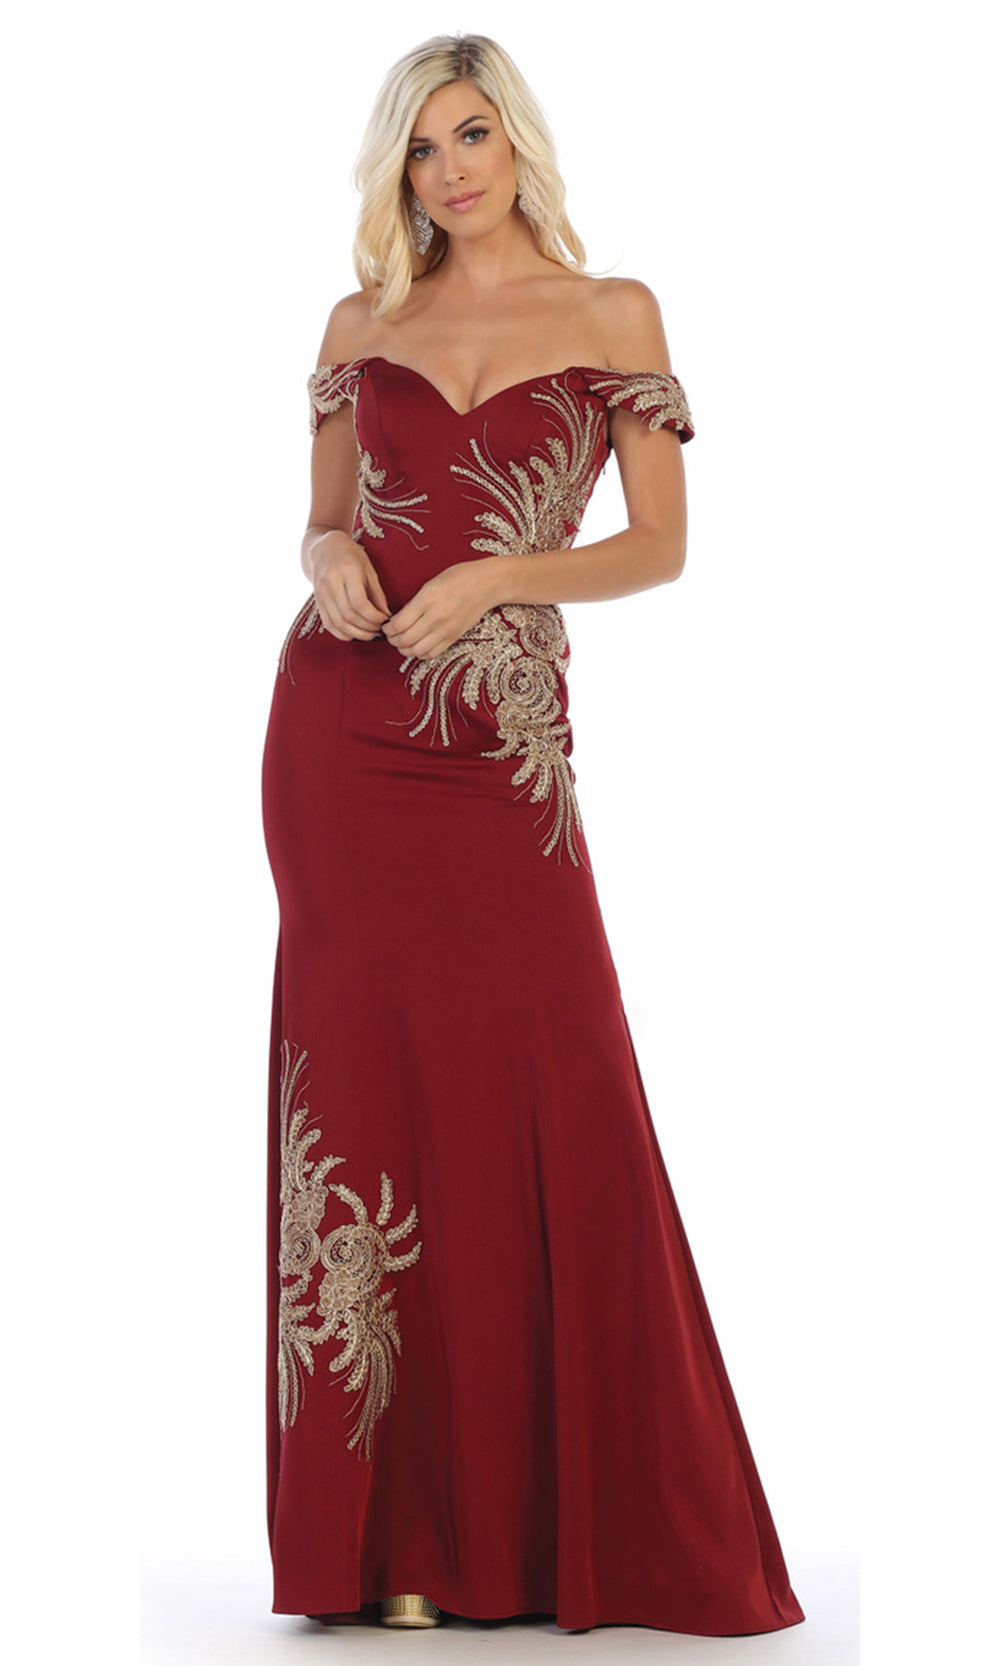 May Queen - RQ7712 Beaded Sweetheart Trumpet Gown In Burgundy